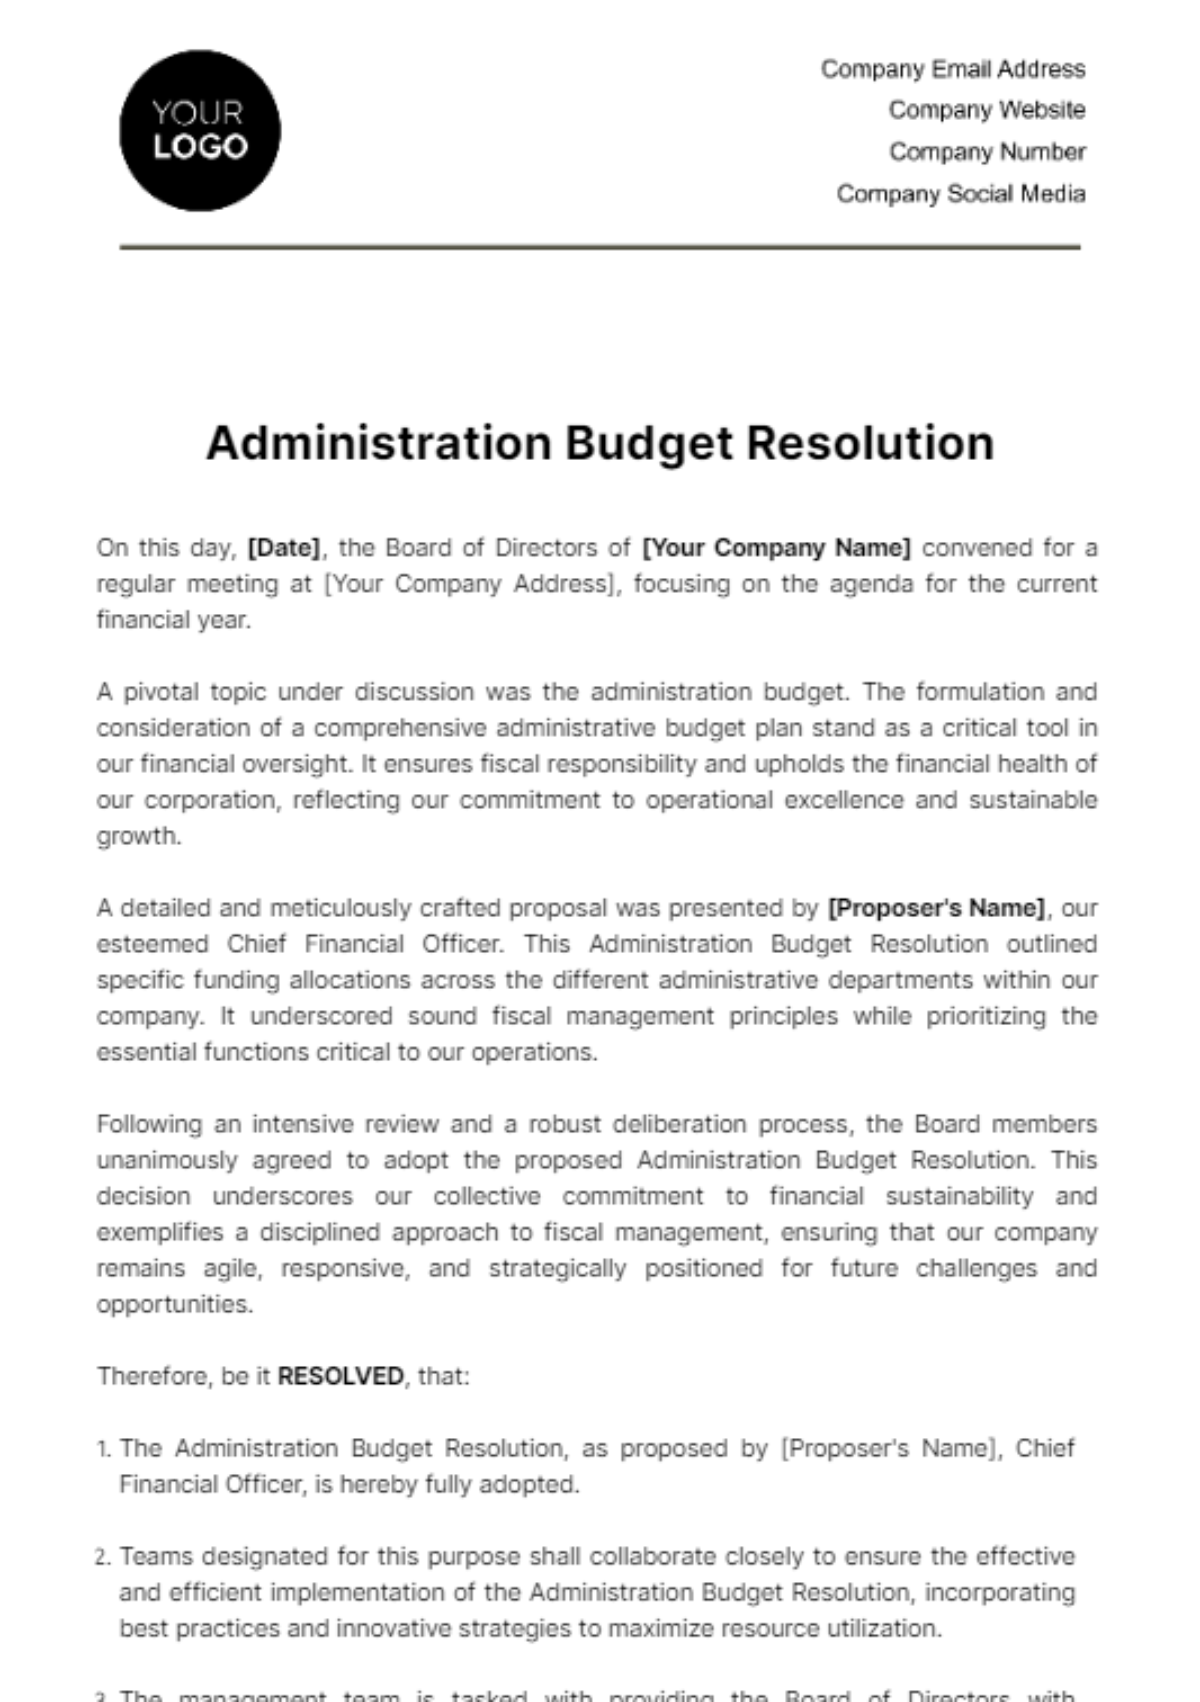 Free Administration Budget Resolution Template